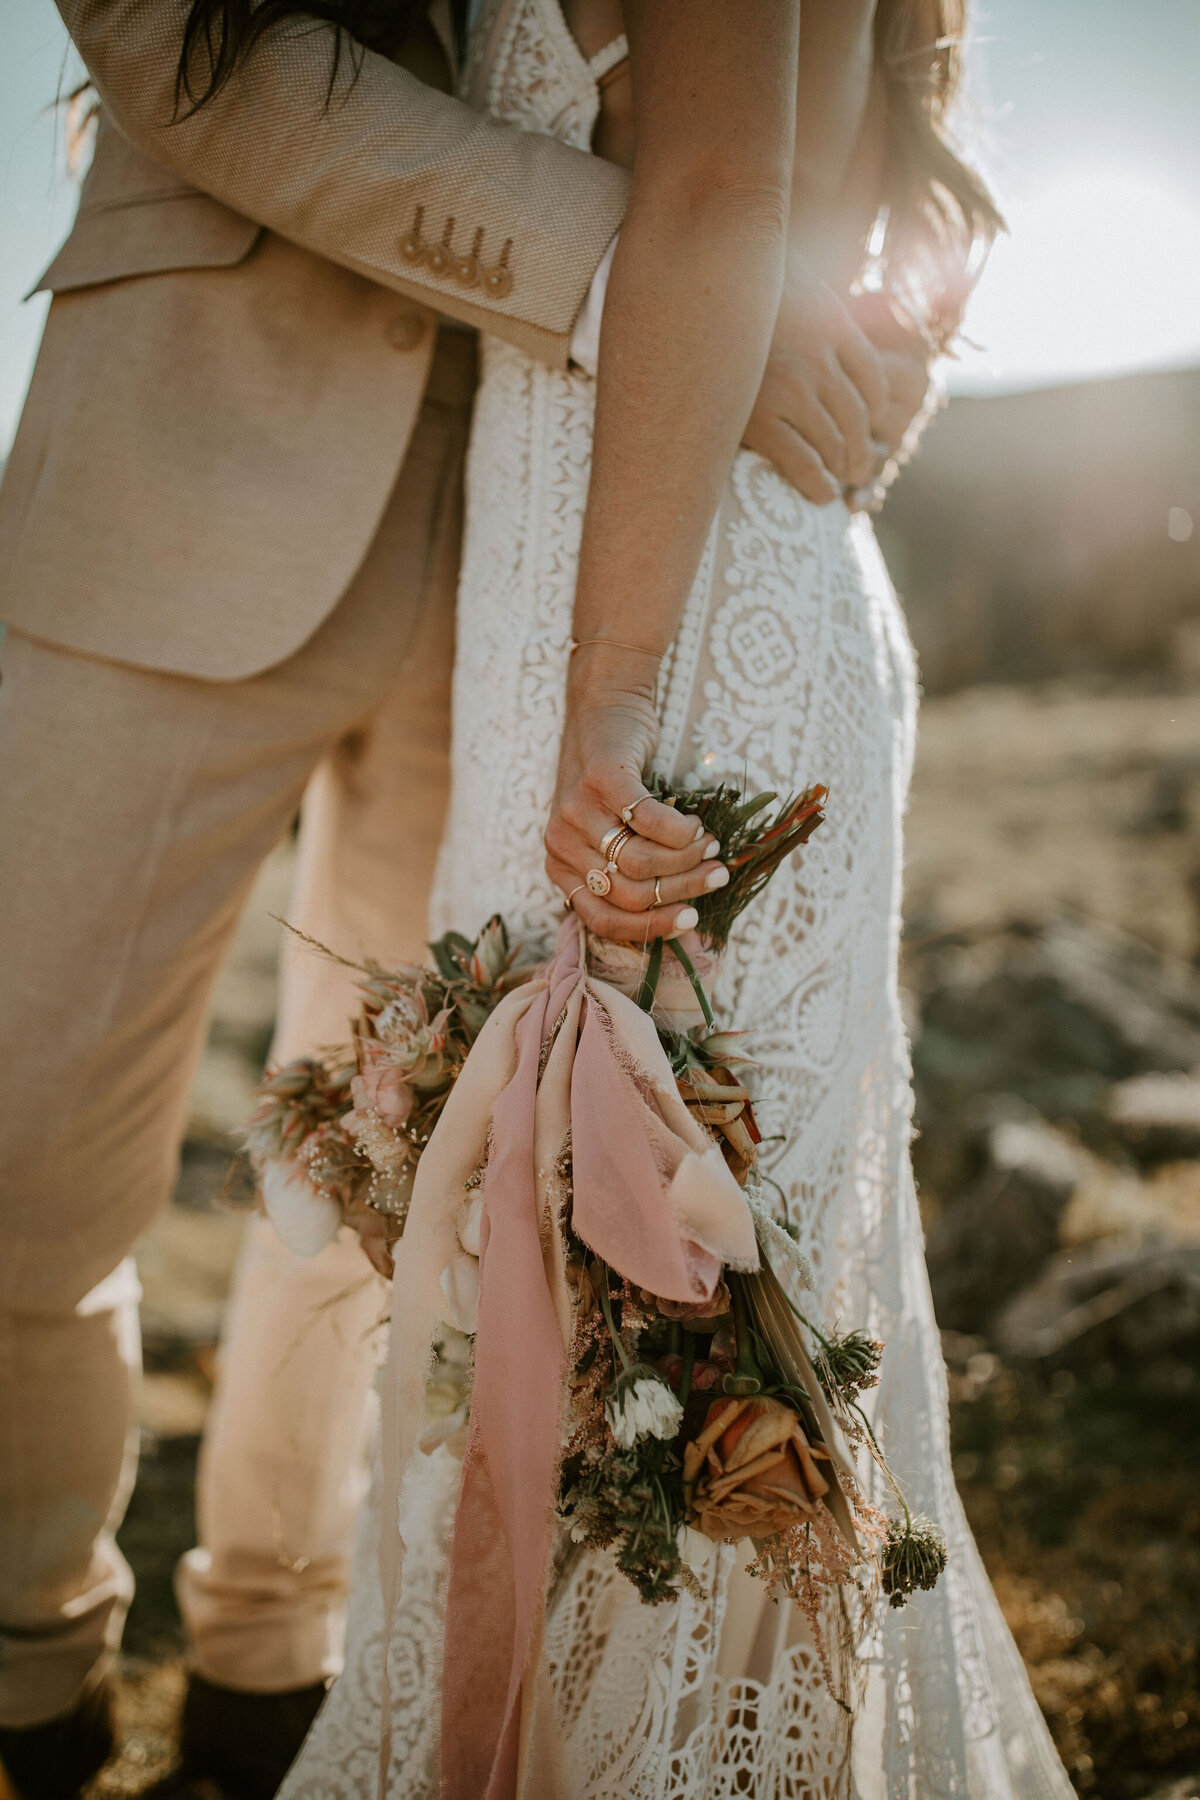 Closeup of bride and groom outdoors wearing an ivory suit and white wedding gown holding a bouquet of flowers.